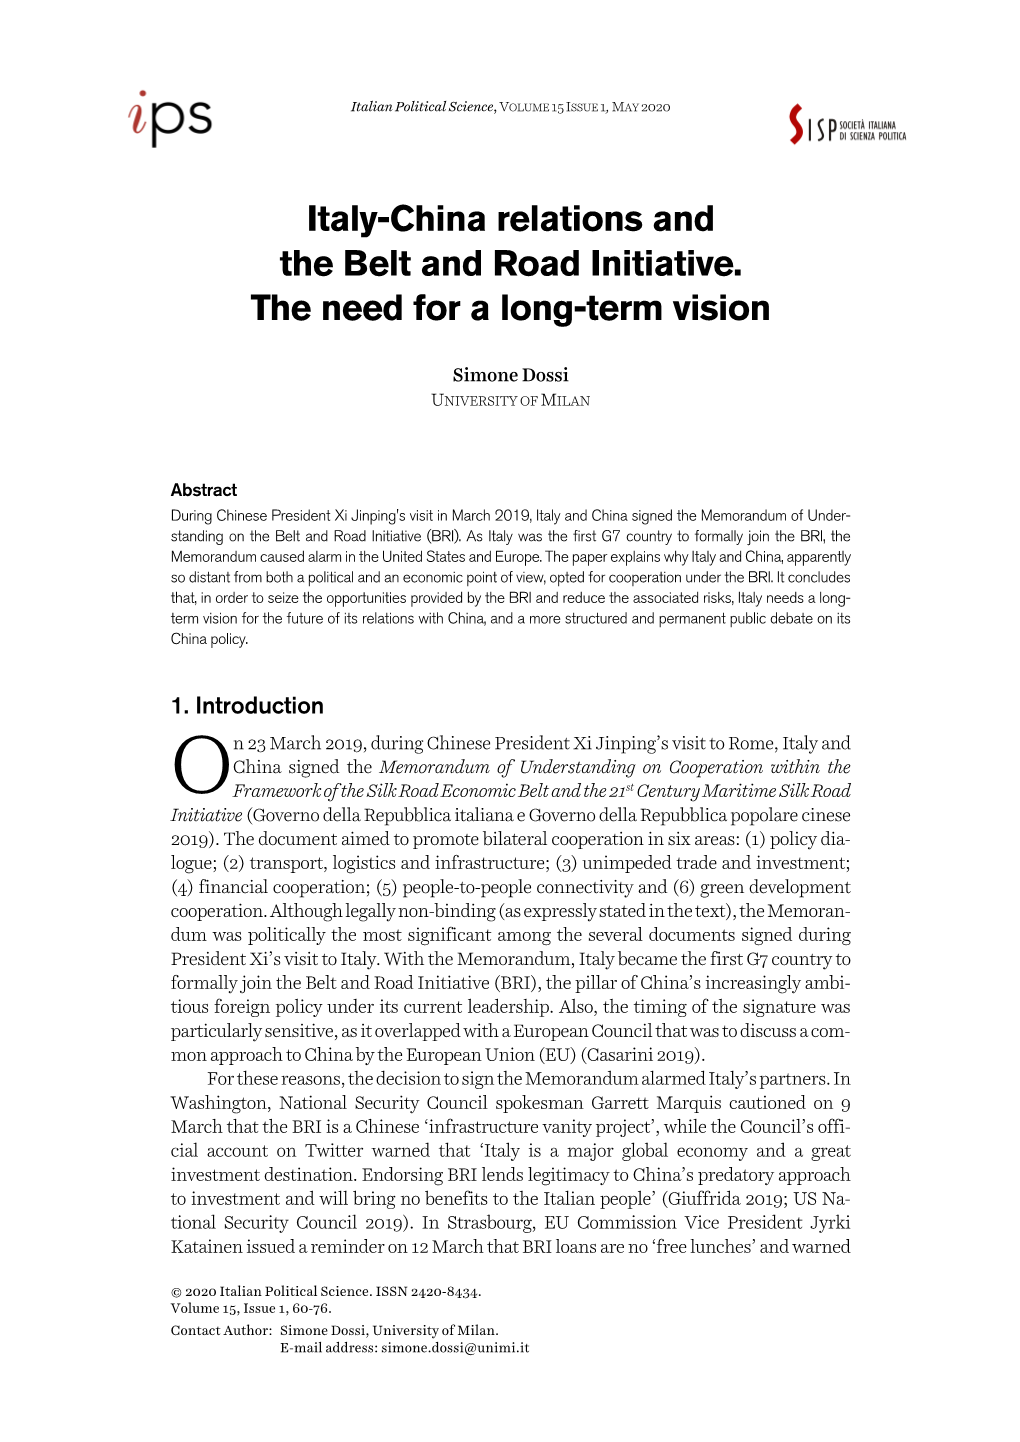 Italy-China Relations and the Belt and Road Initiative. the Need for a Long-Term Vision